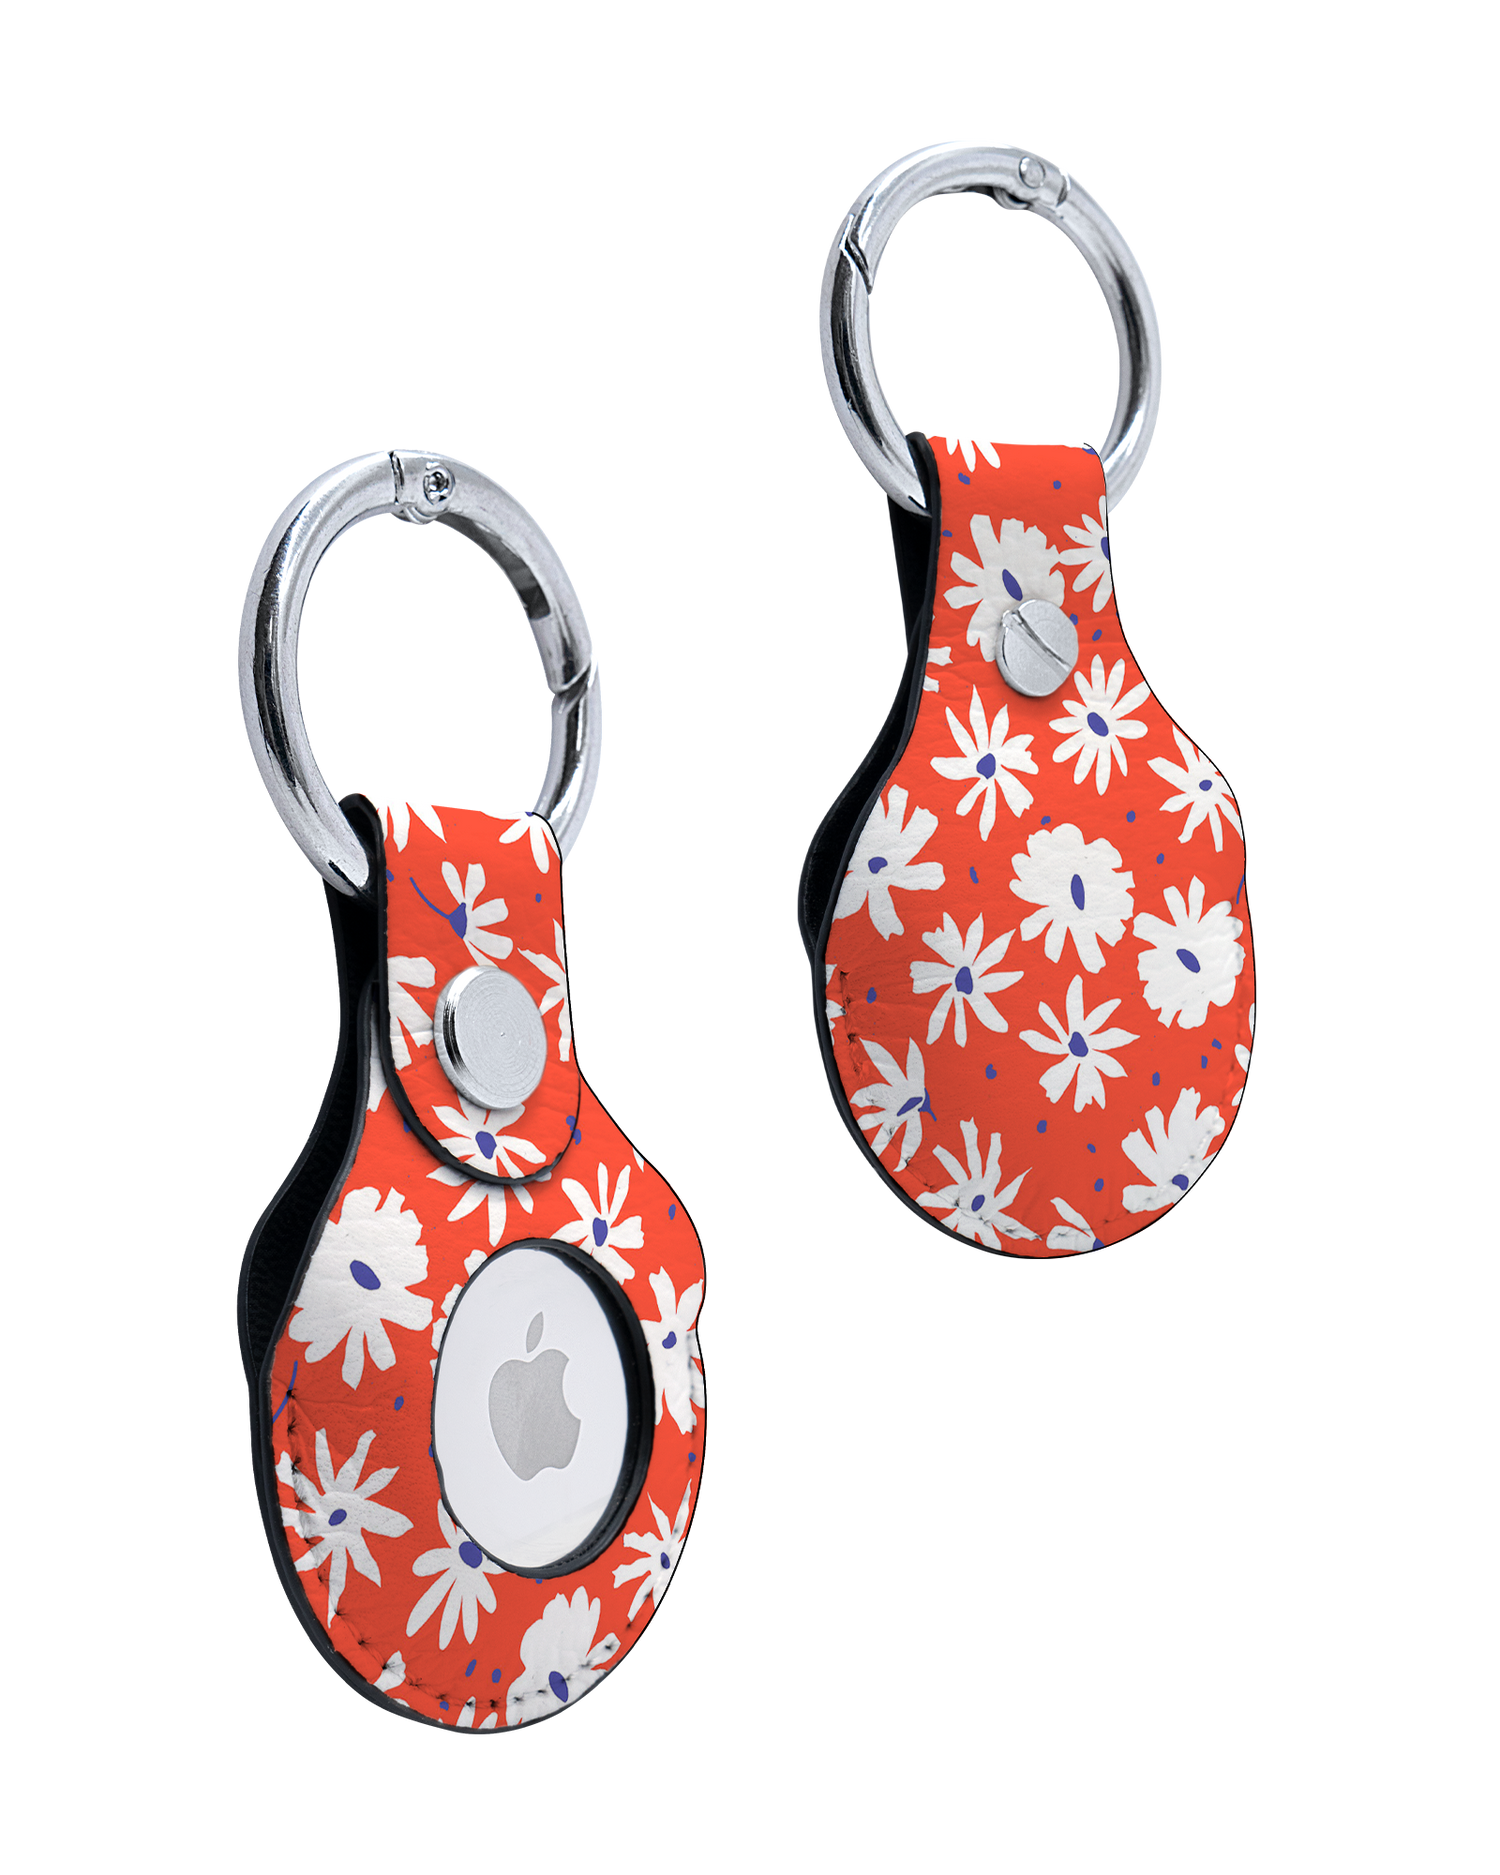 AirTag Holder with Retro Daisy Design: Front and Back